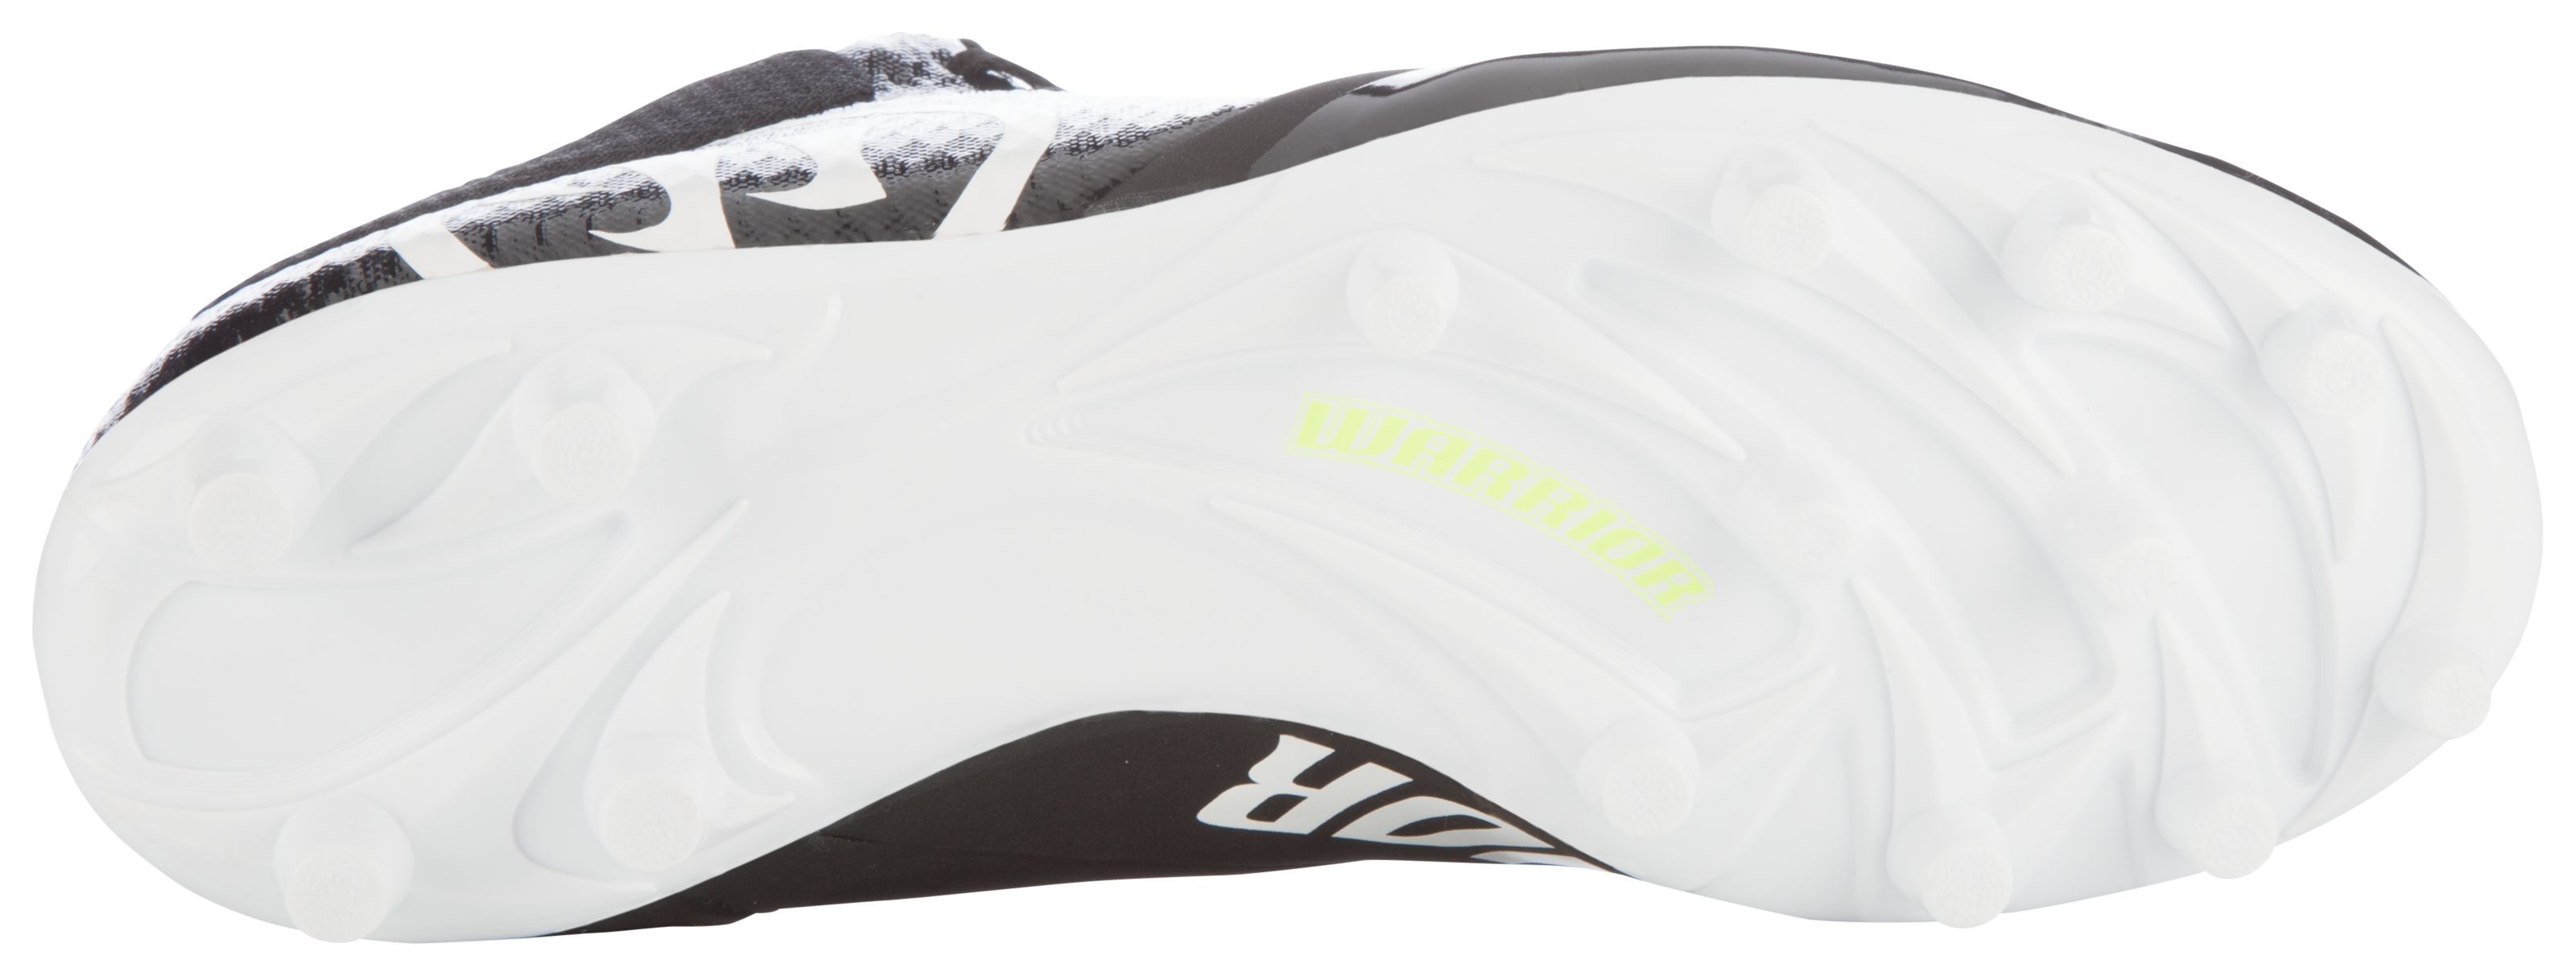 Burn 9.0 Jr. Cleat, Black with White image number 3